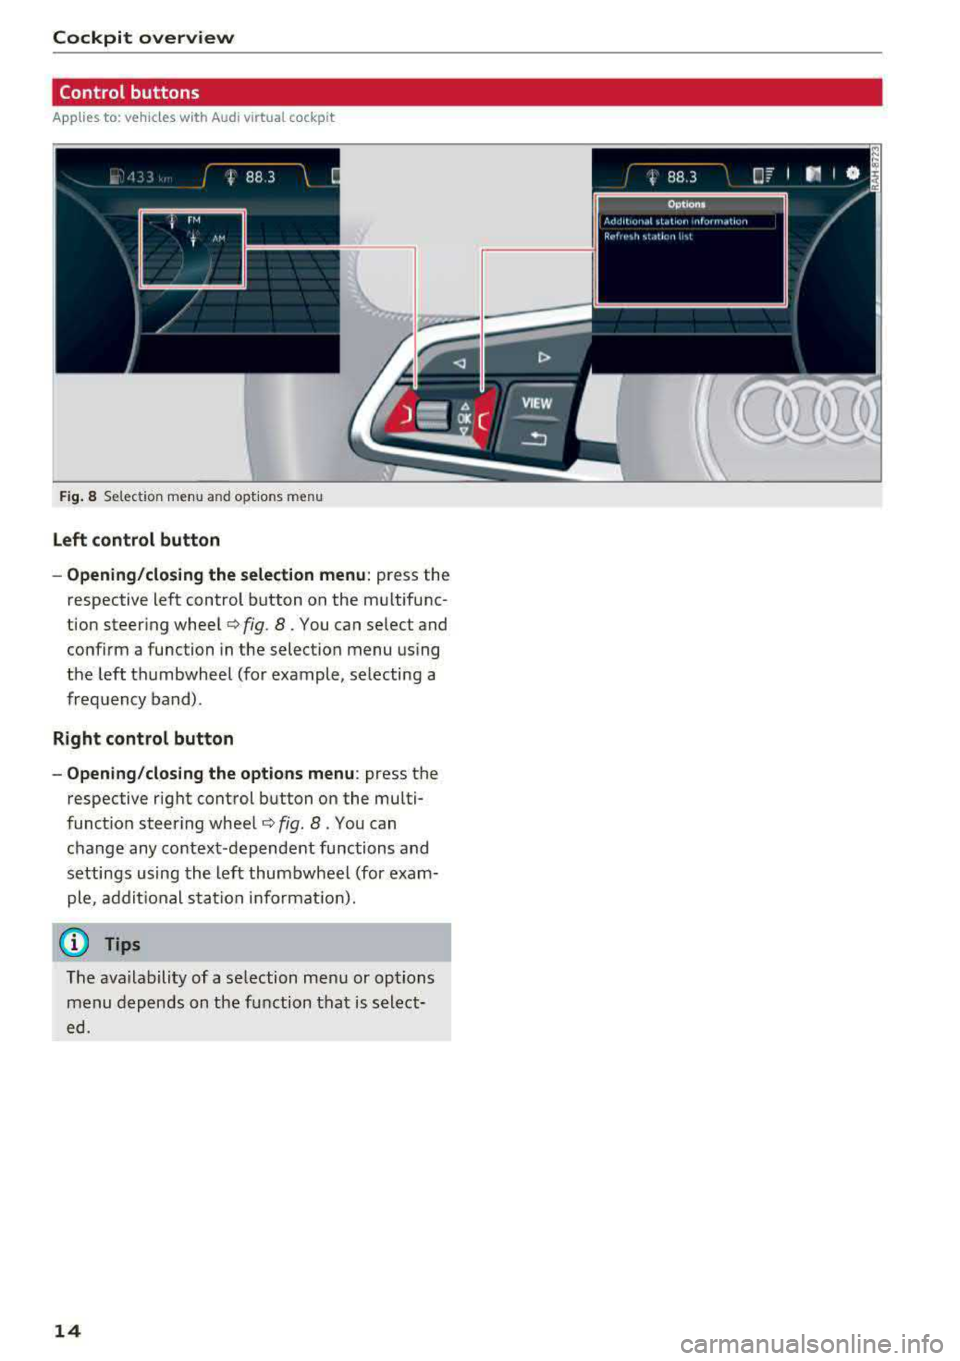 AUDI A3 SEDAN 2017  Owners Manual Cockpit  overview 
Control  buttons 
Applies  to: vehicles with  Audi virtual  cockpit 
I rM 
 t M ... 
F ig . 8 Se lect ion  menu  and optio ns  m en u 
Left  control  button 
- Opening/closing the